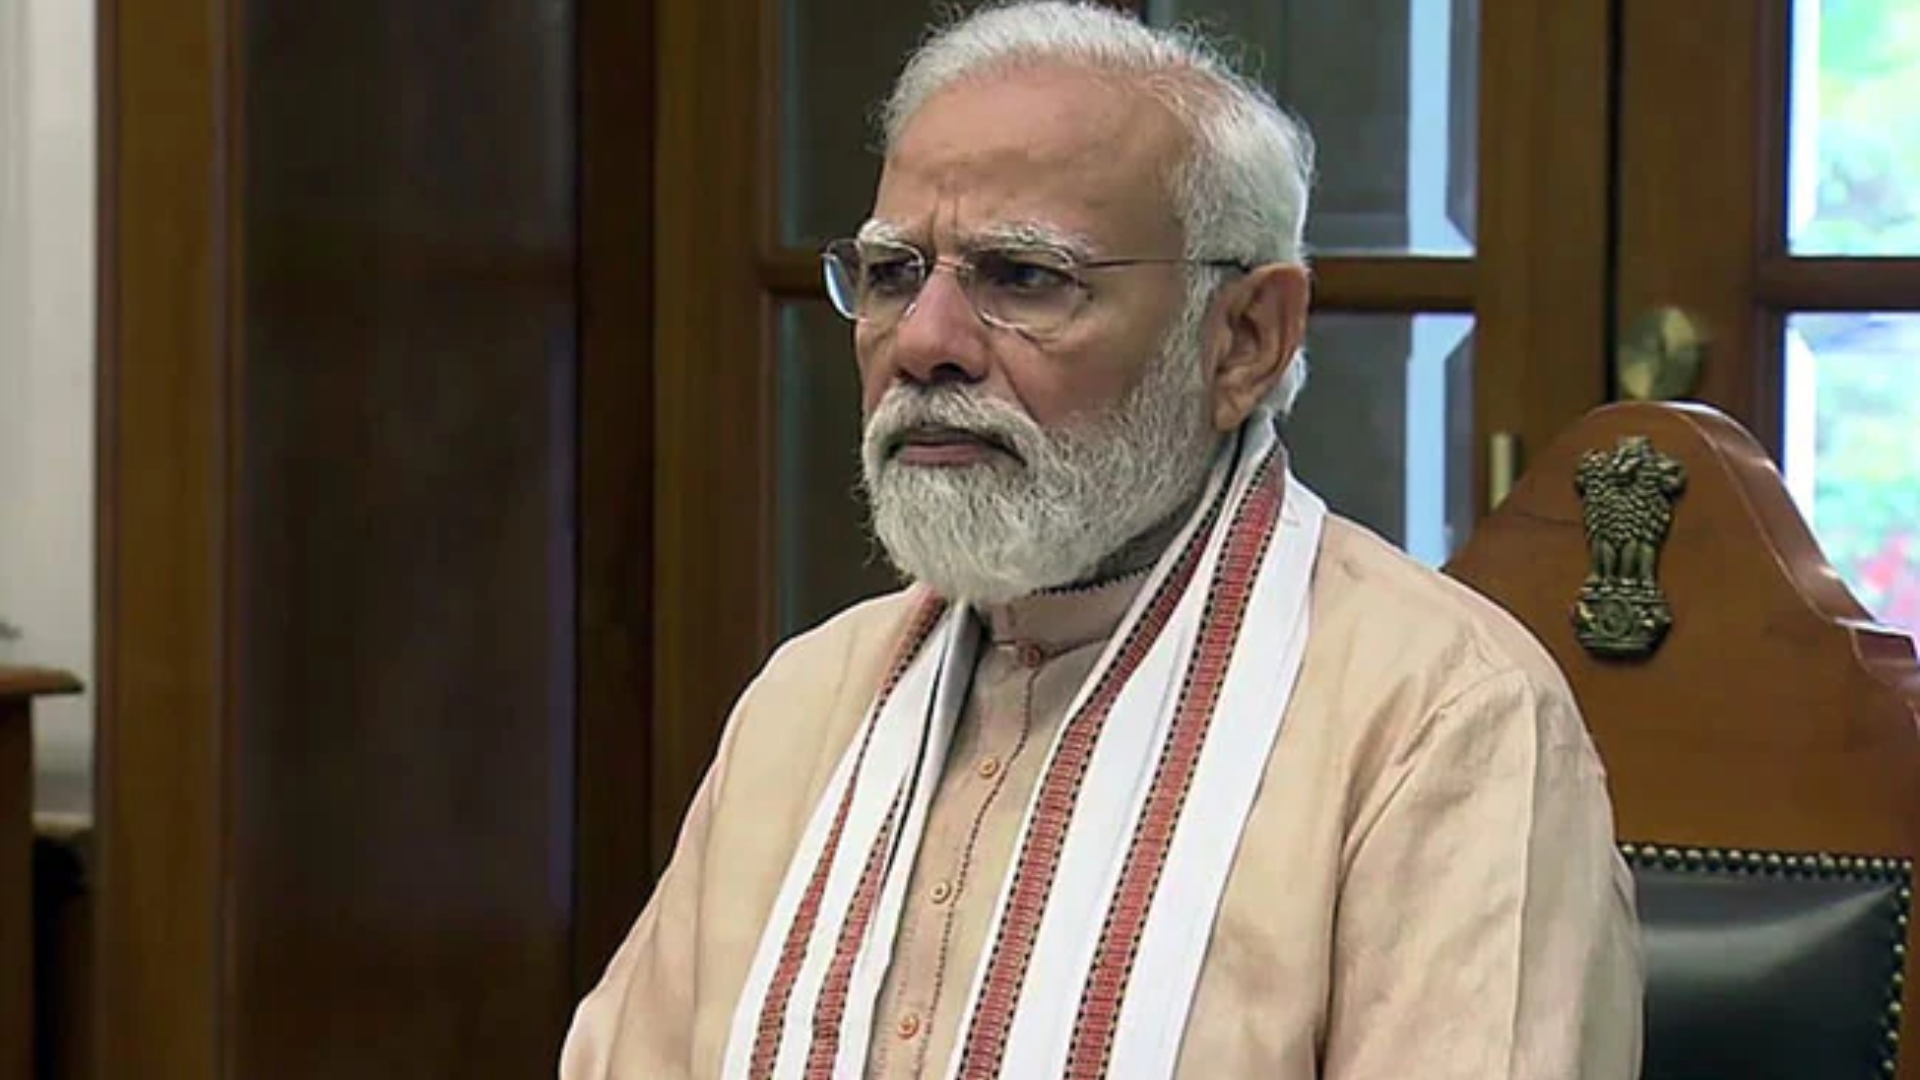 Prime Minister Modi to Attend Crucial Meetings Amid Cyclone Aftermath and Heatwave Crisis